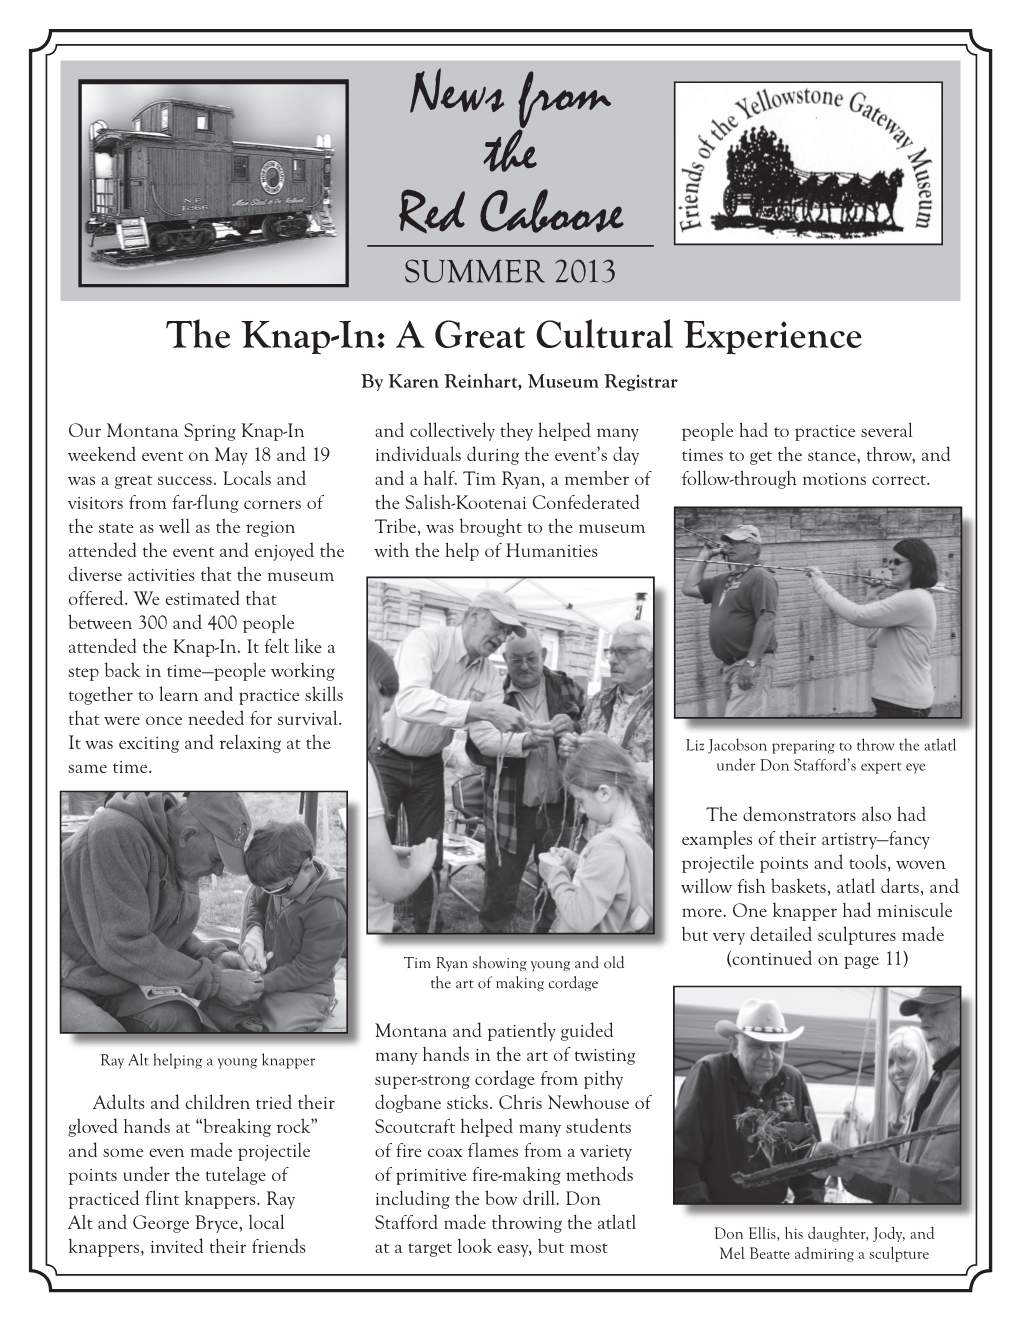 News from the Red Caboose SUMMER 2013 the Knap-In: a Great Cultural Experience by Karen Reinhart, Museum Registrar